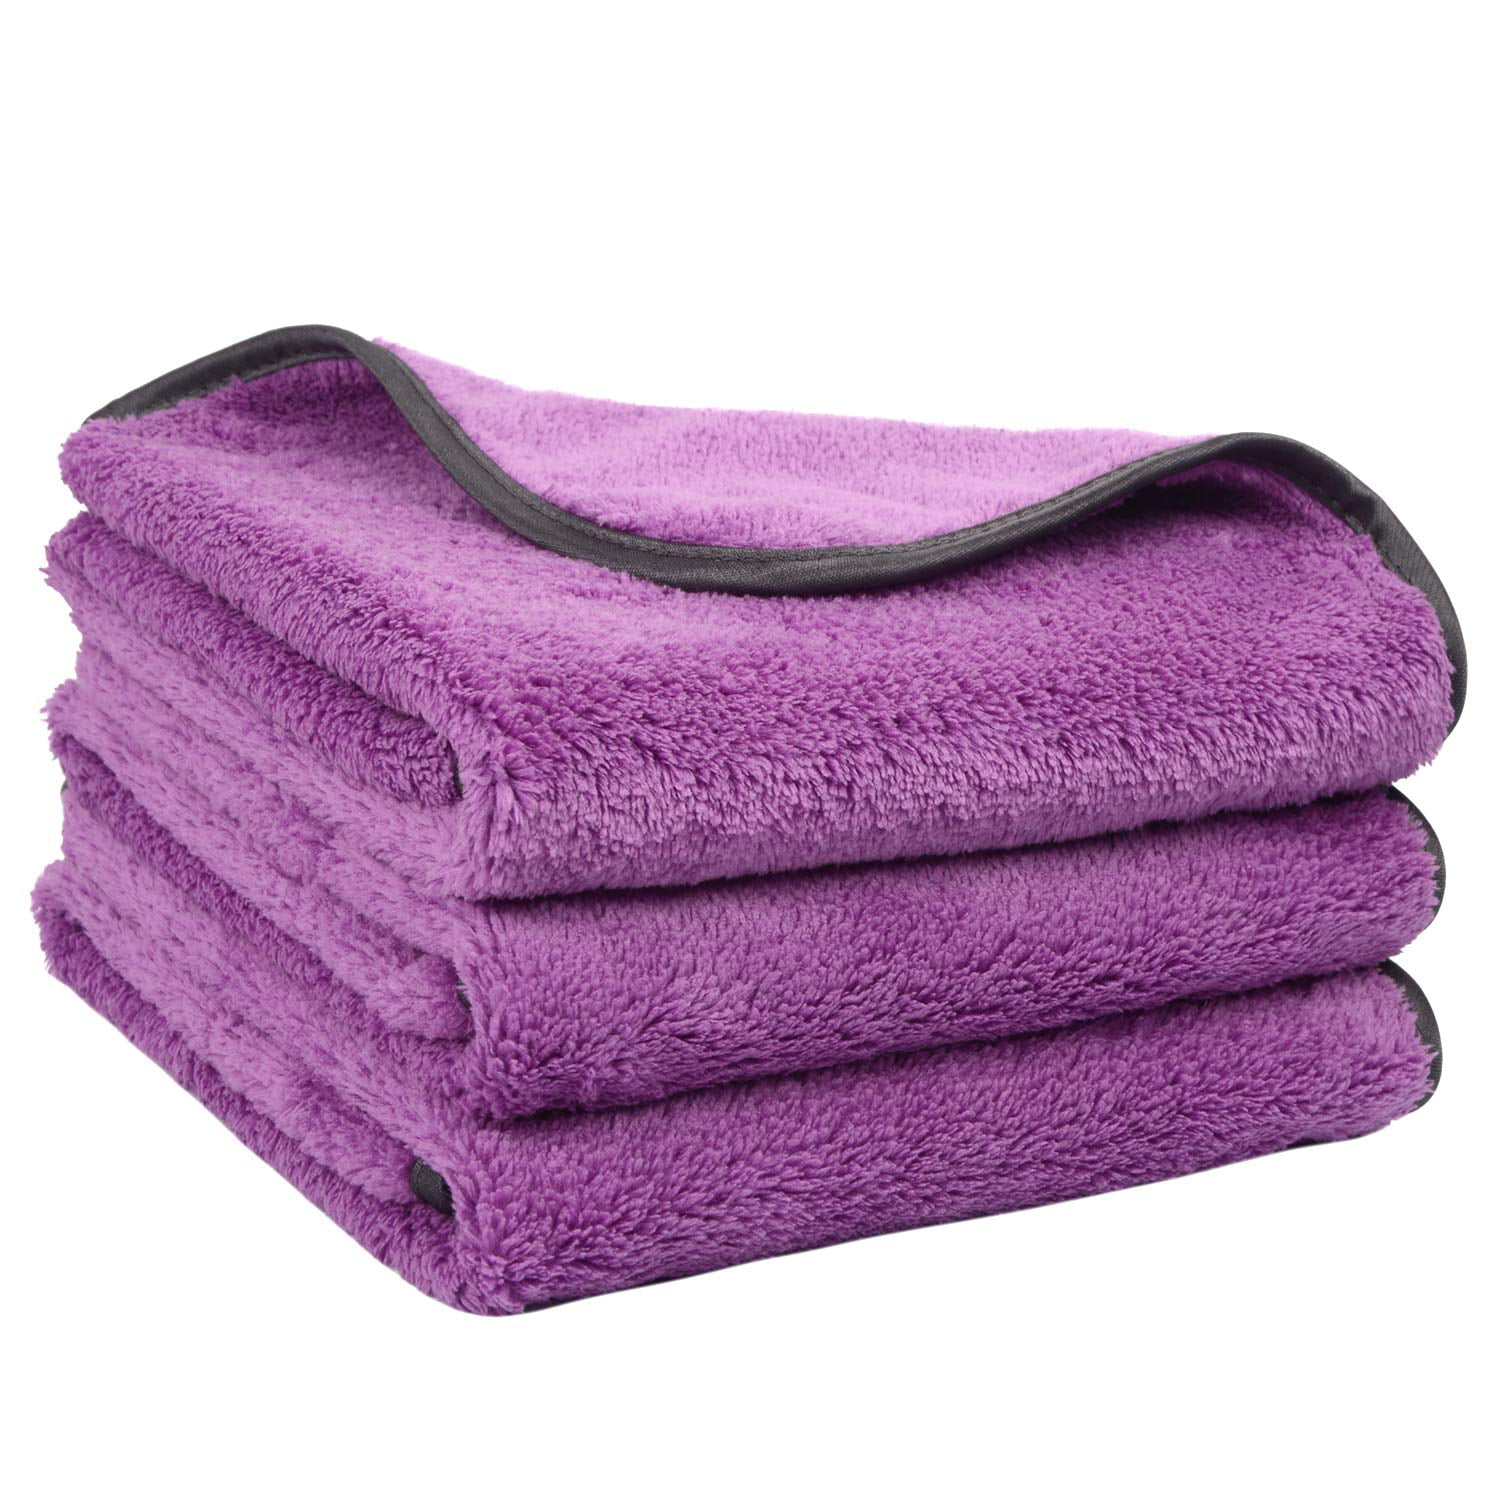 Wiping and Cleaning By Cadie Sponge Towel Soft and Absorbent Cloth for Drying 